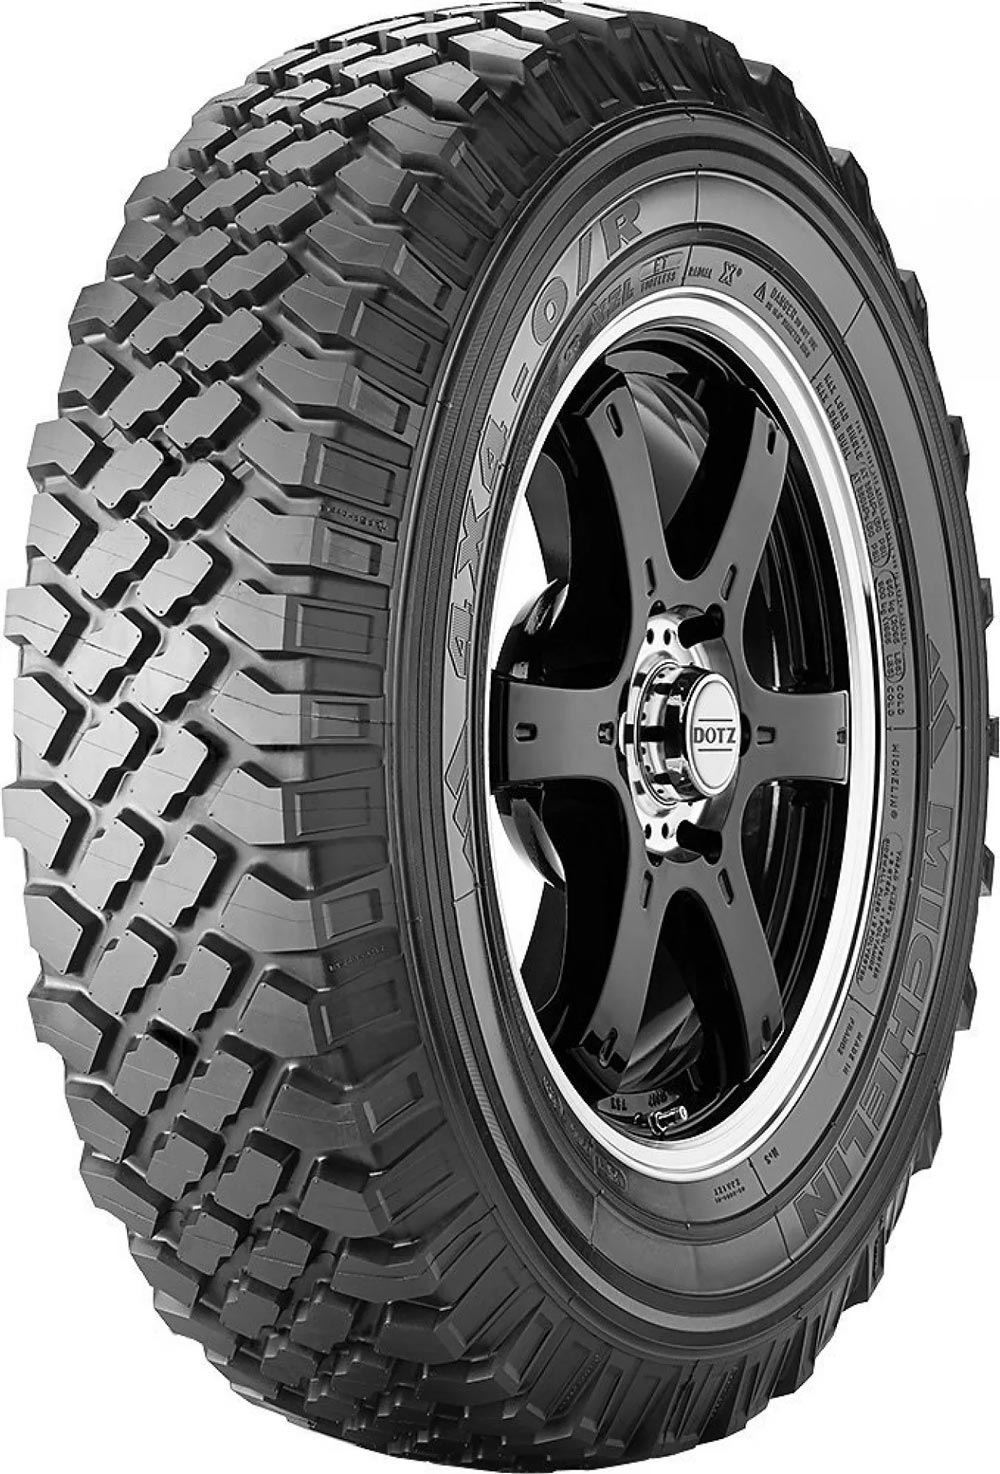 Anvelope auto MICHELIN 4x4 O XZL 7.50 R16 116N